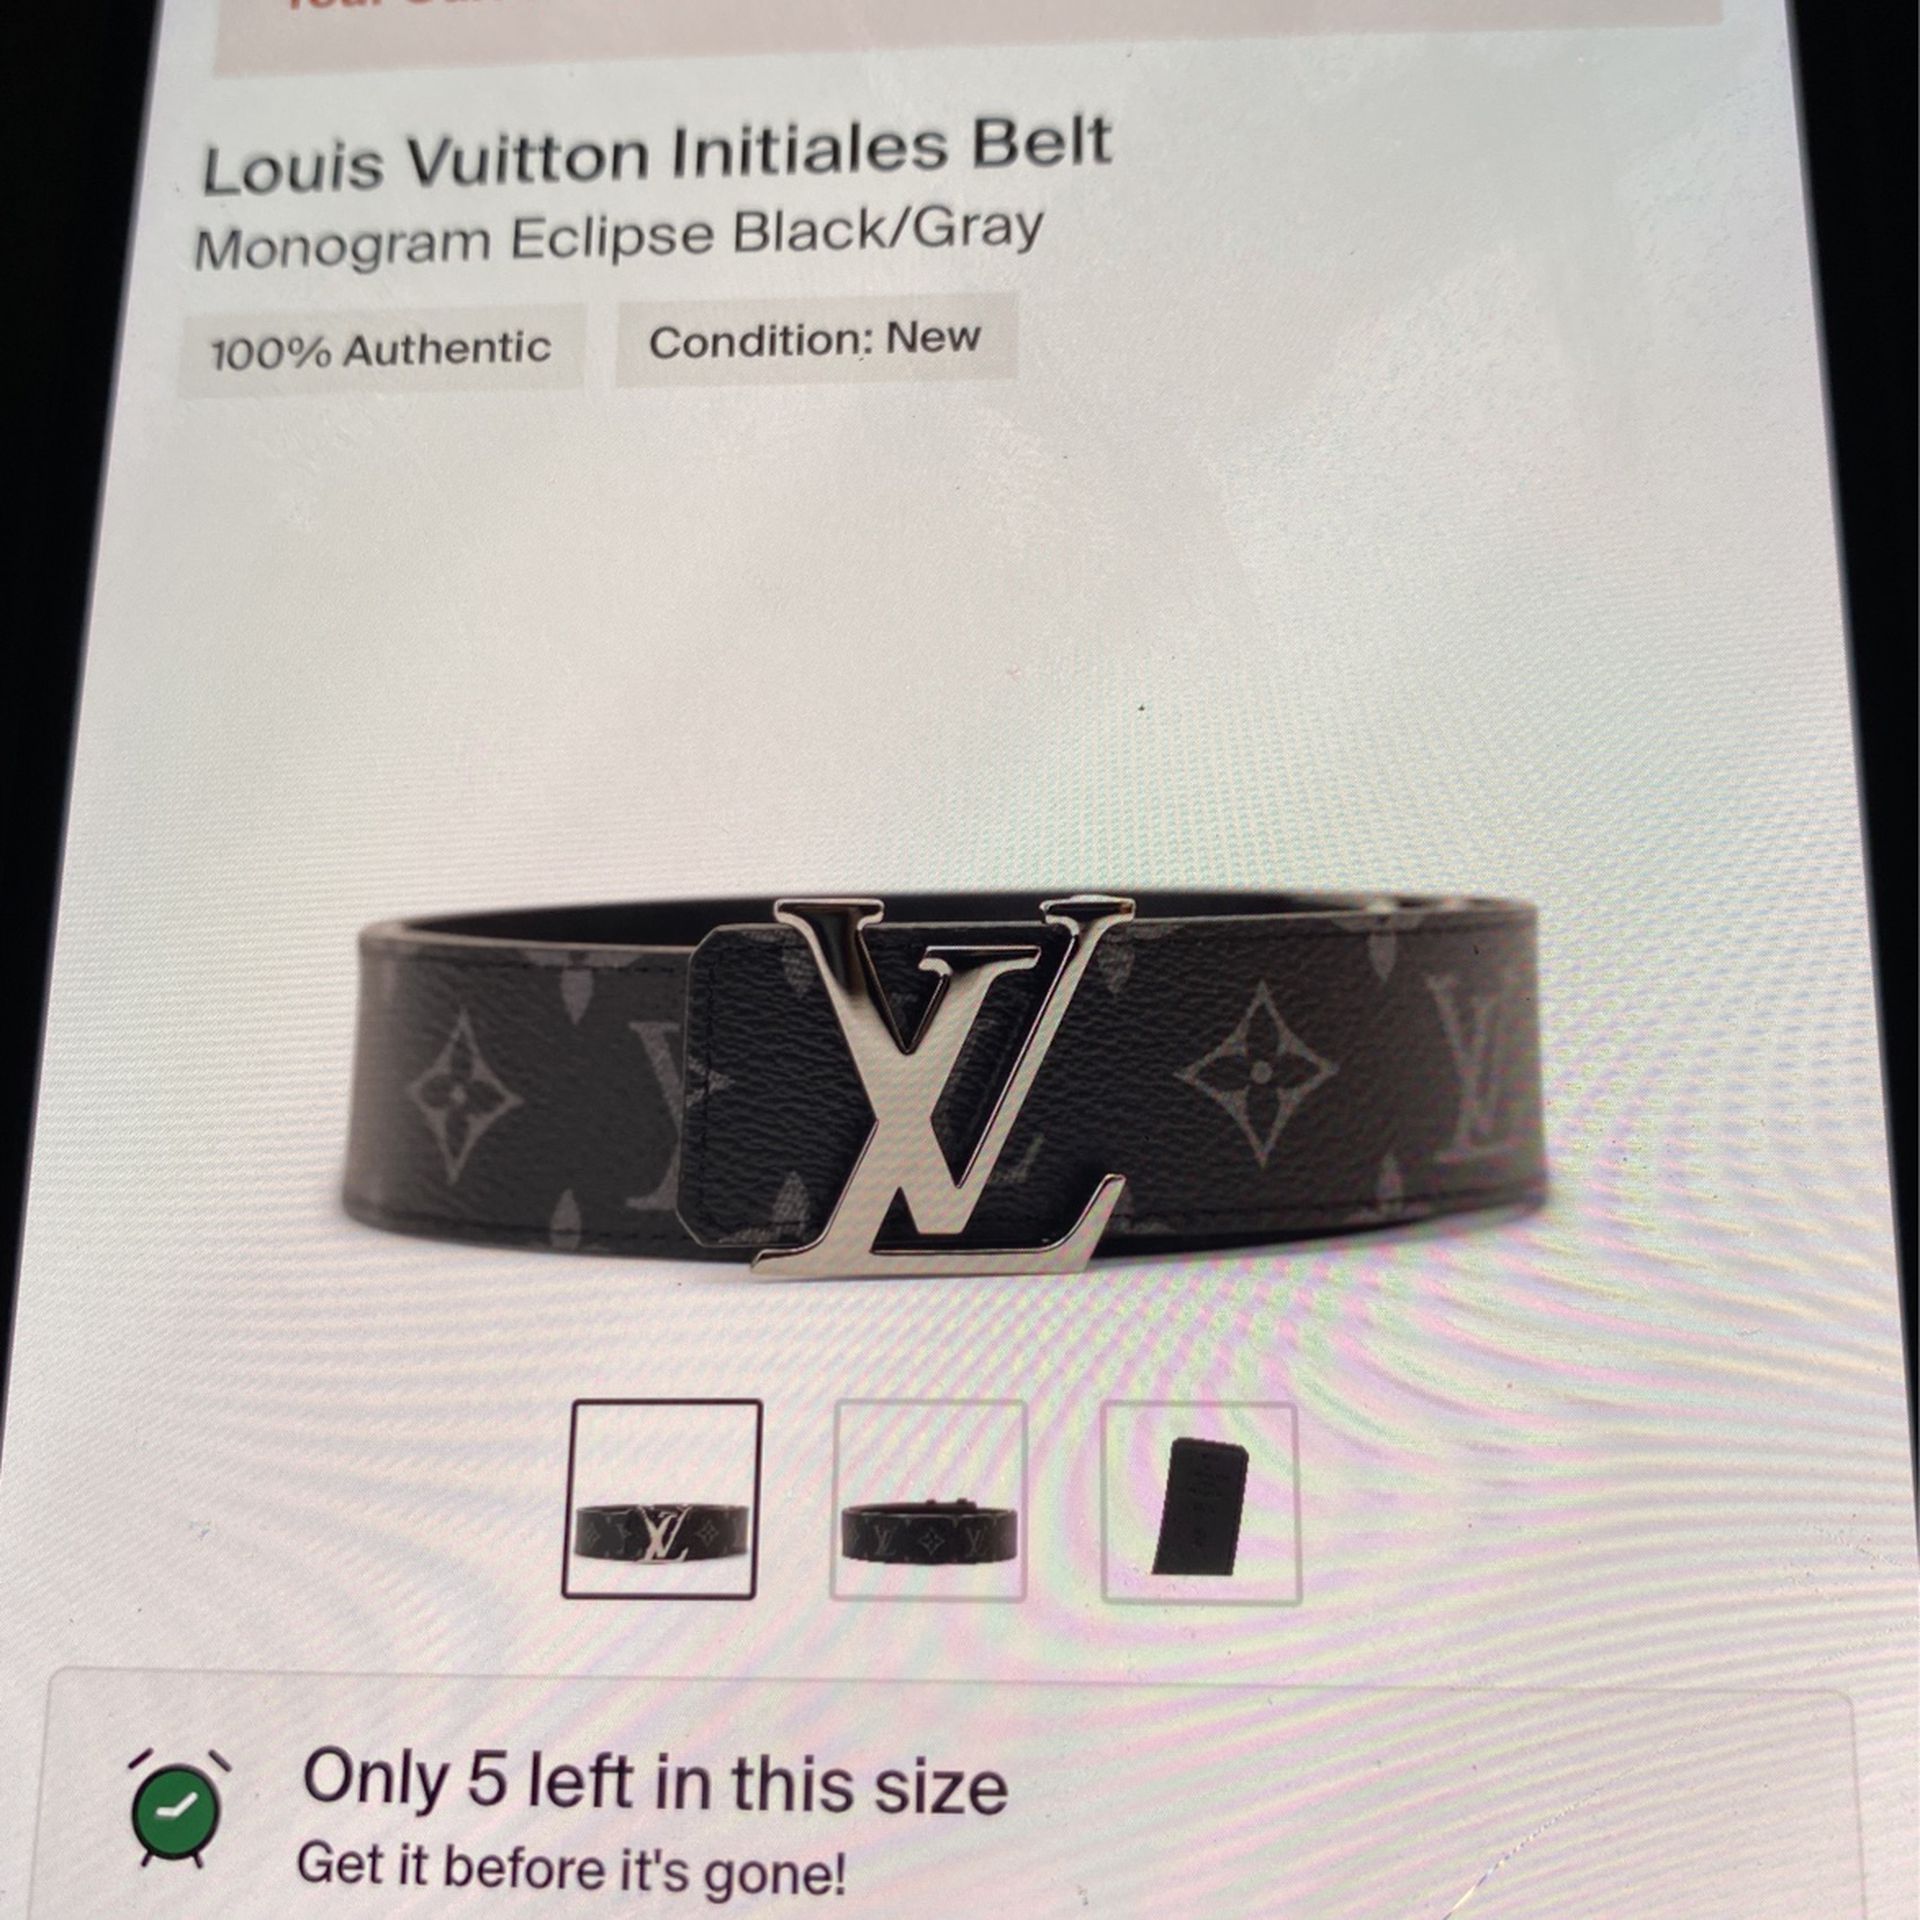 lv box - Belts Prices and Promotions - Fashion Accessories Nov